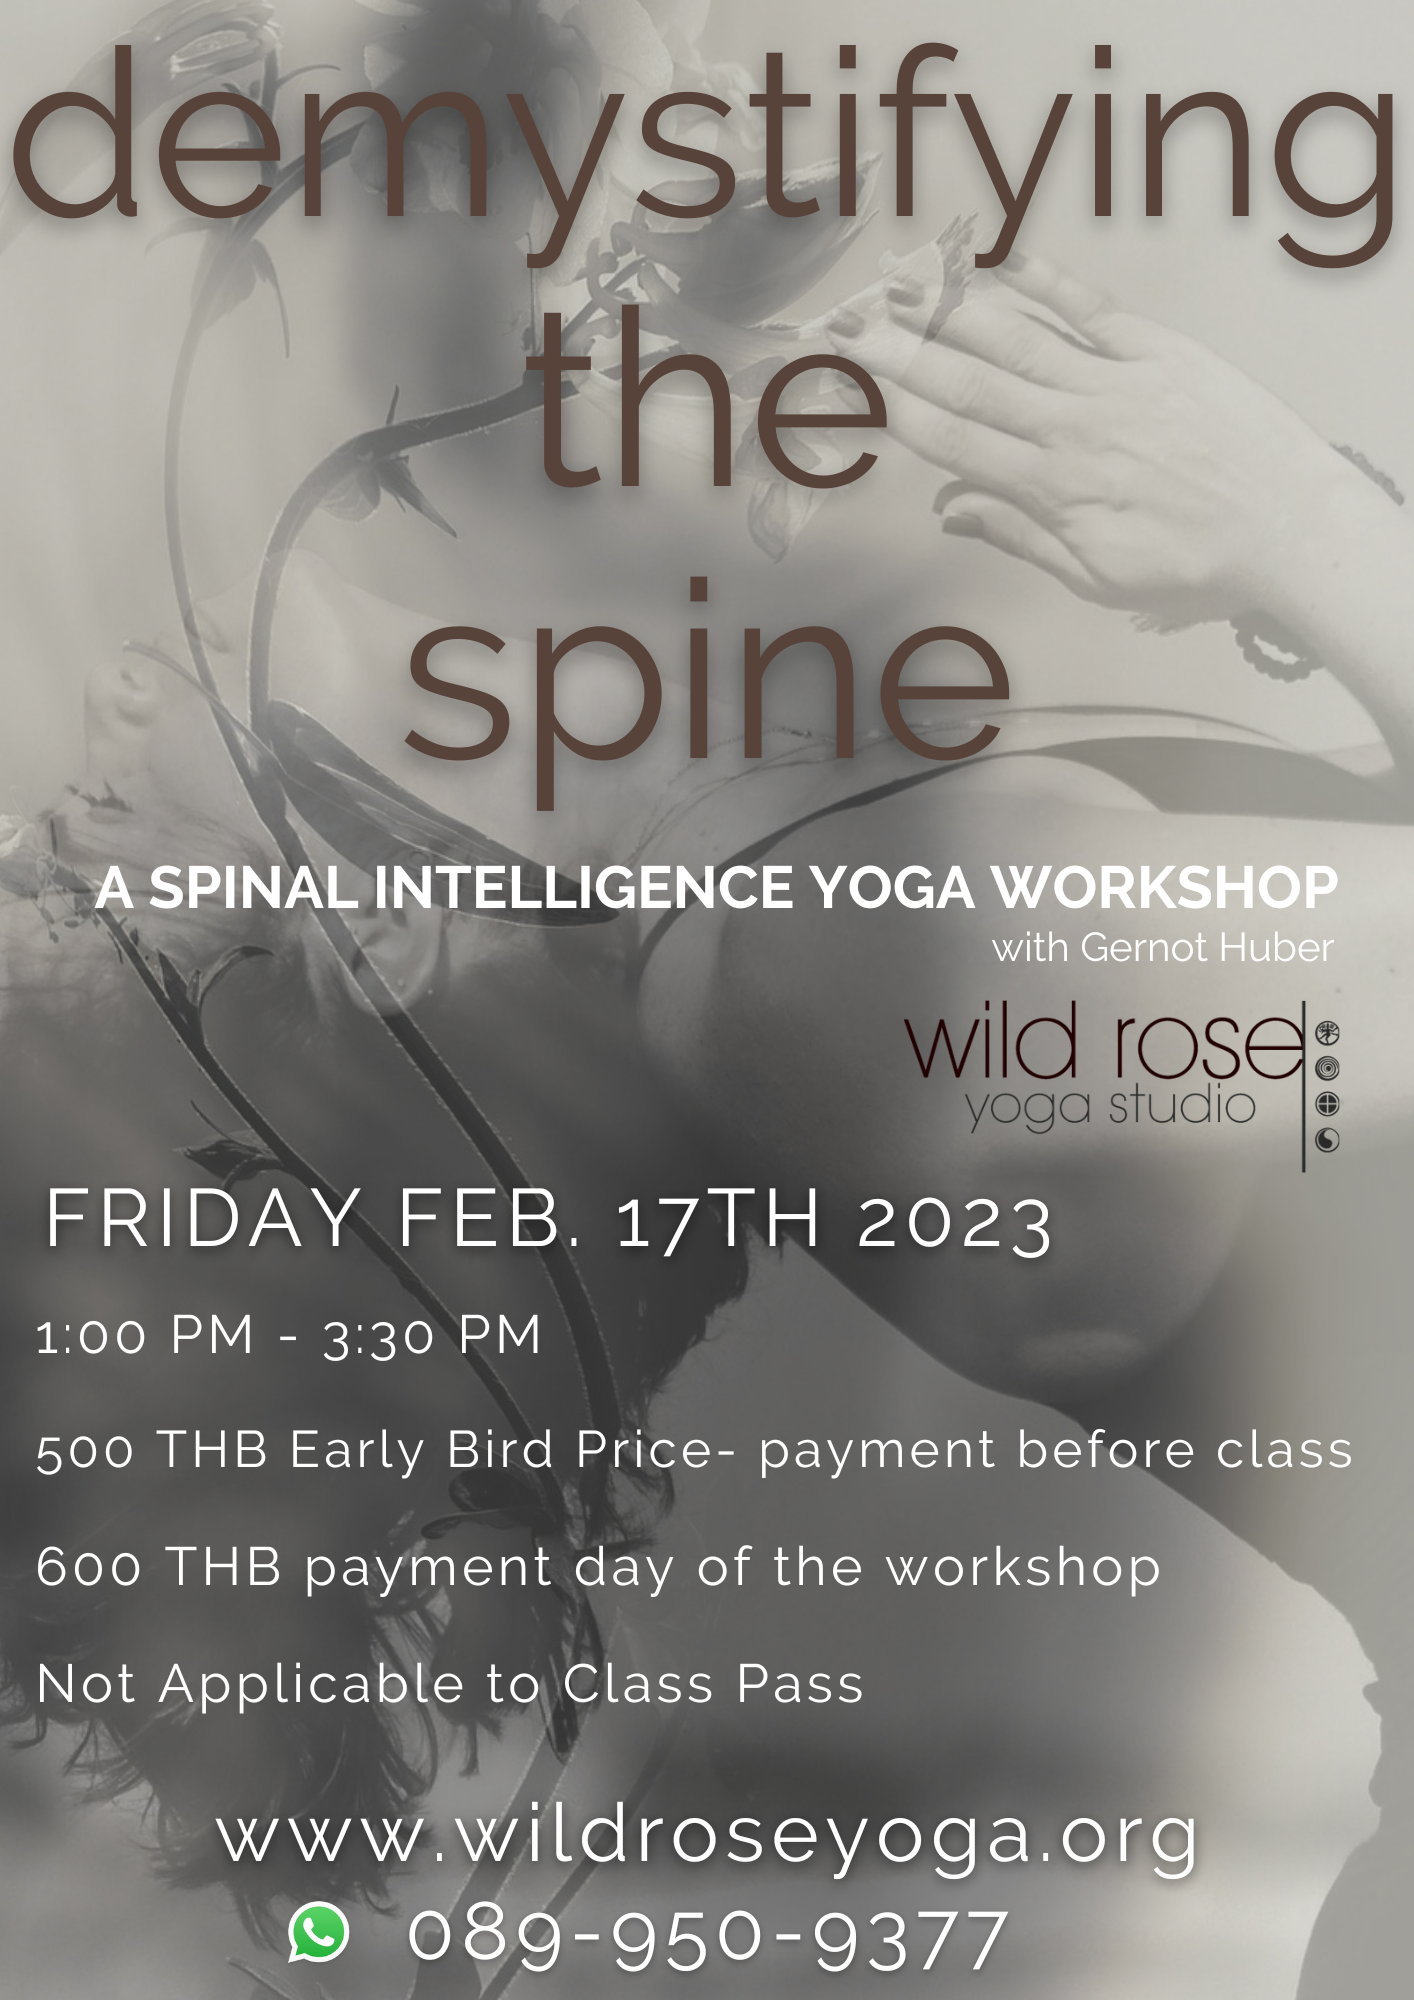 Spinal Intelligence Yoga Workshop in Chiang Mai on February 17th 2023